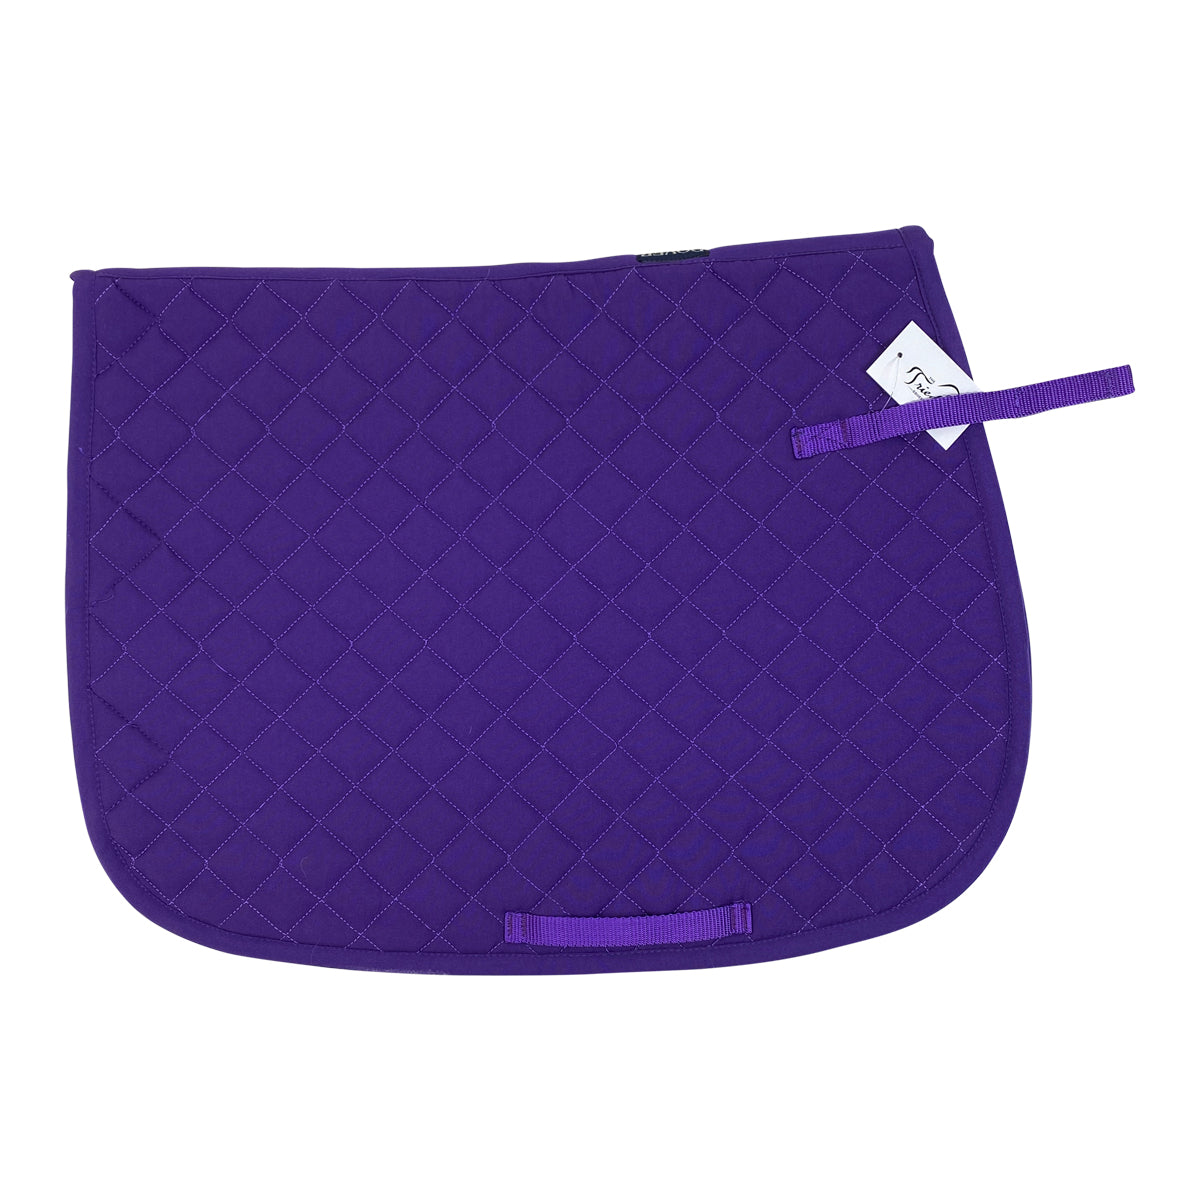 Dover Saddlery Quilted AP Pad in Purple